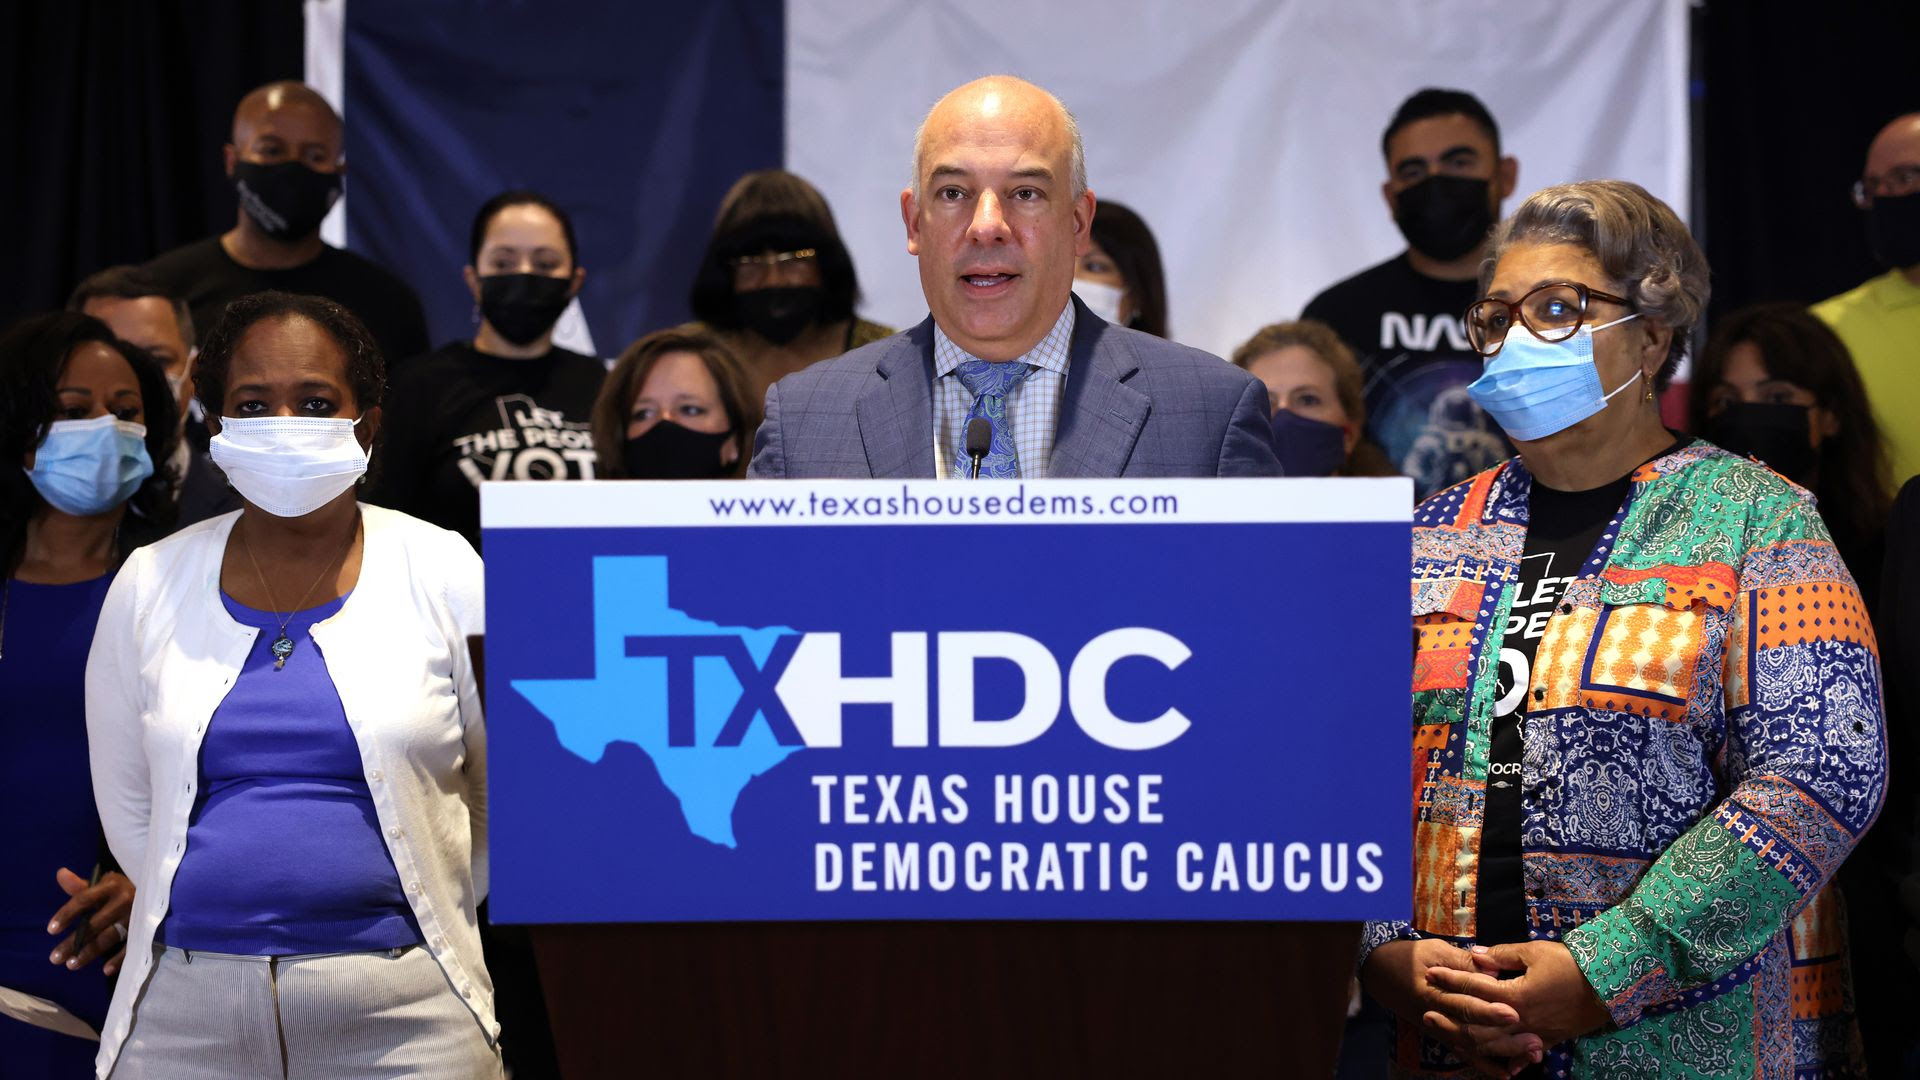 The Texas Democrats had to get a restraining order to begin returning home